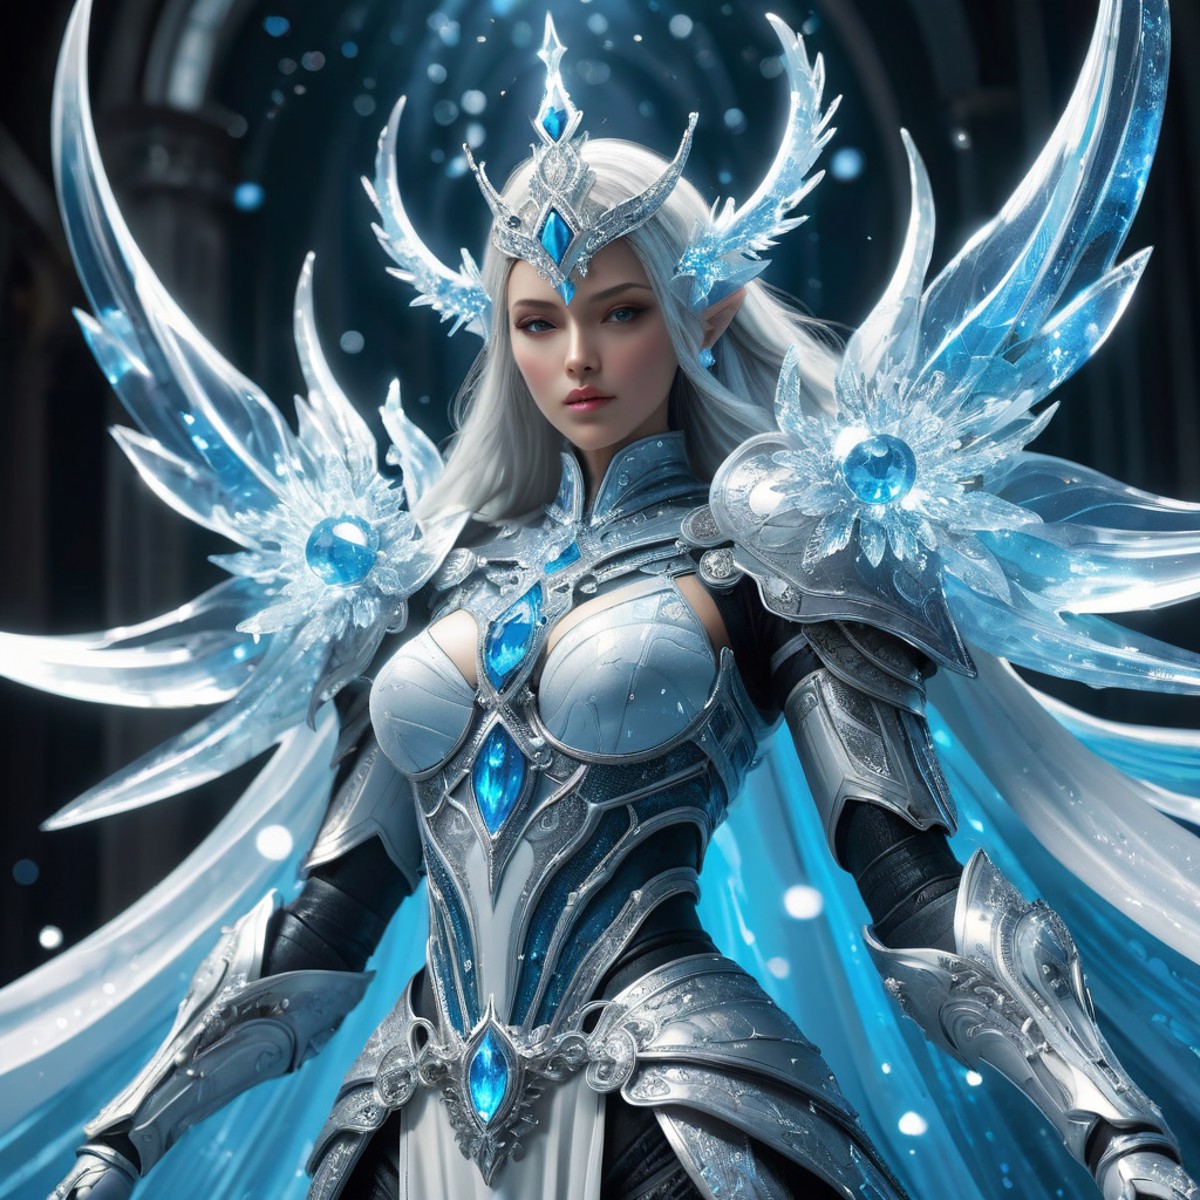 A white magical knight in the form of an ice crystal, with silver armor and a long skirt, holding many blue crystals on hi...